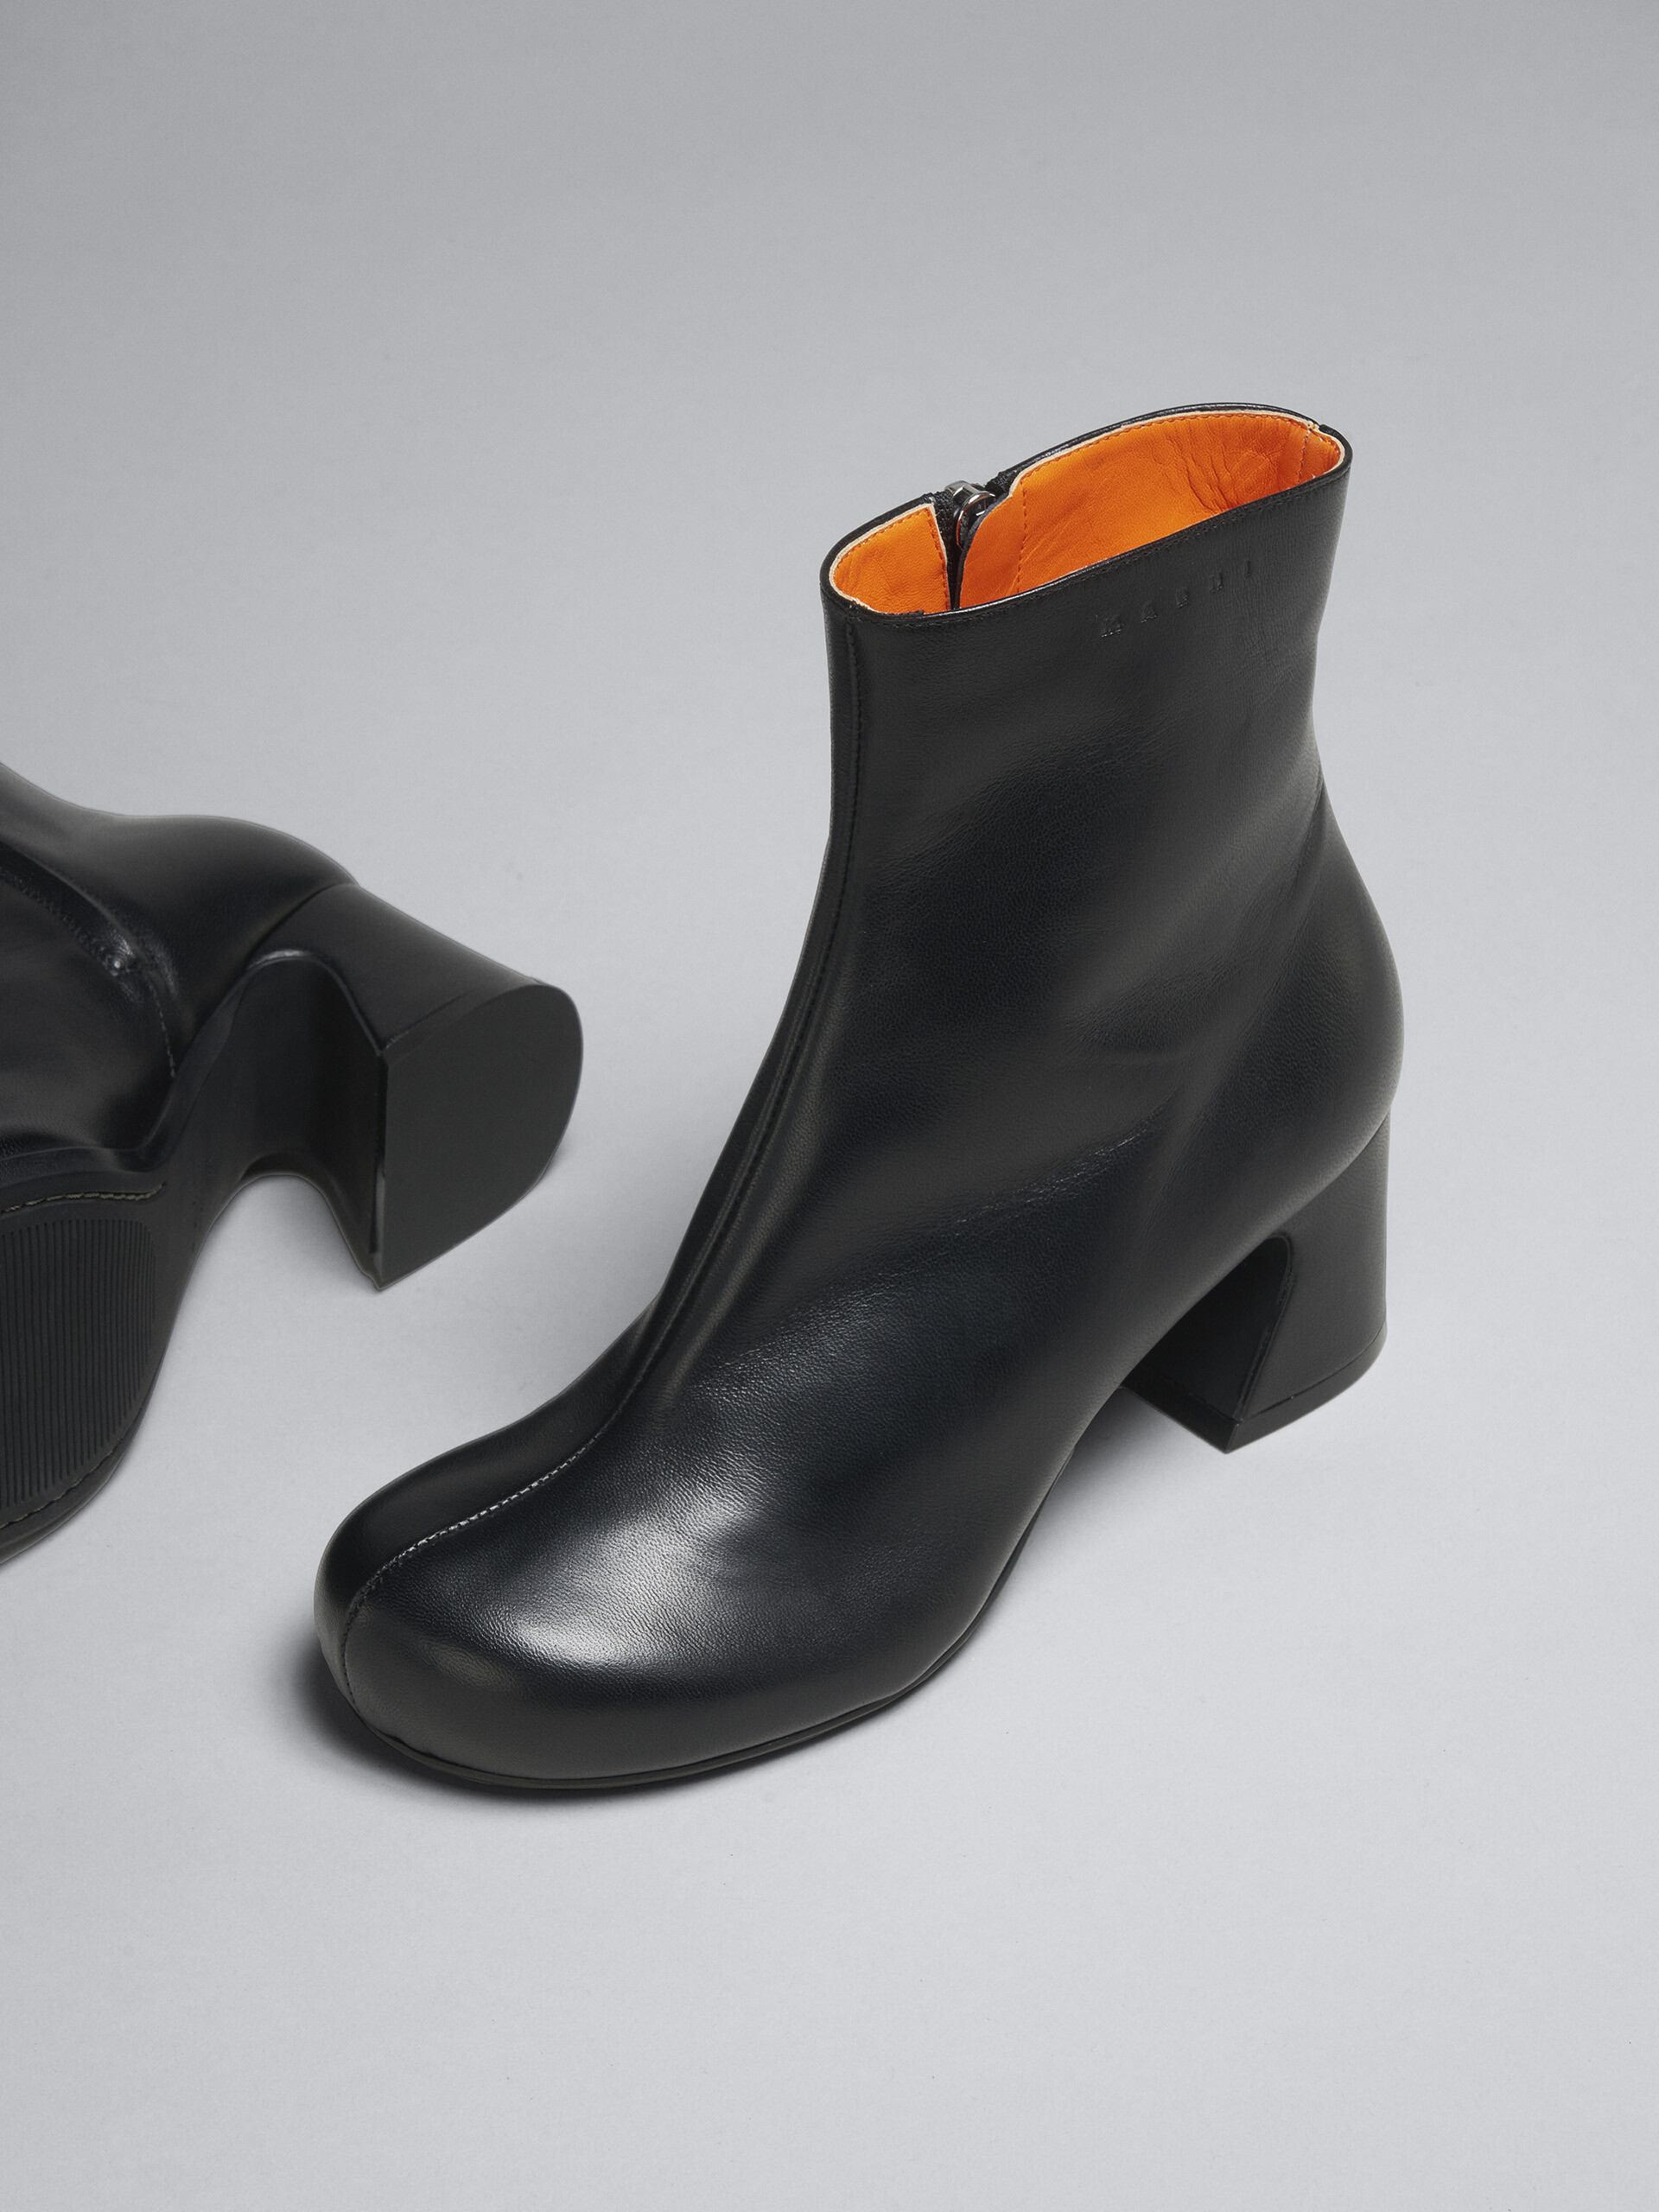 Black leather ankle boot - Boots - Image 4